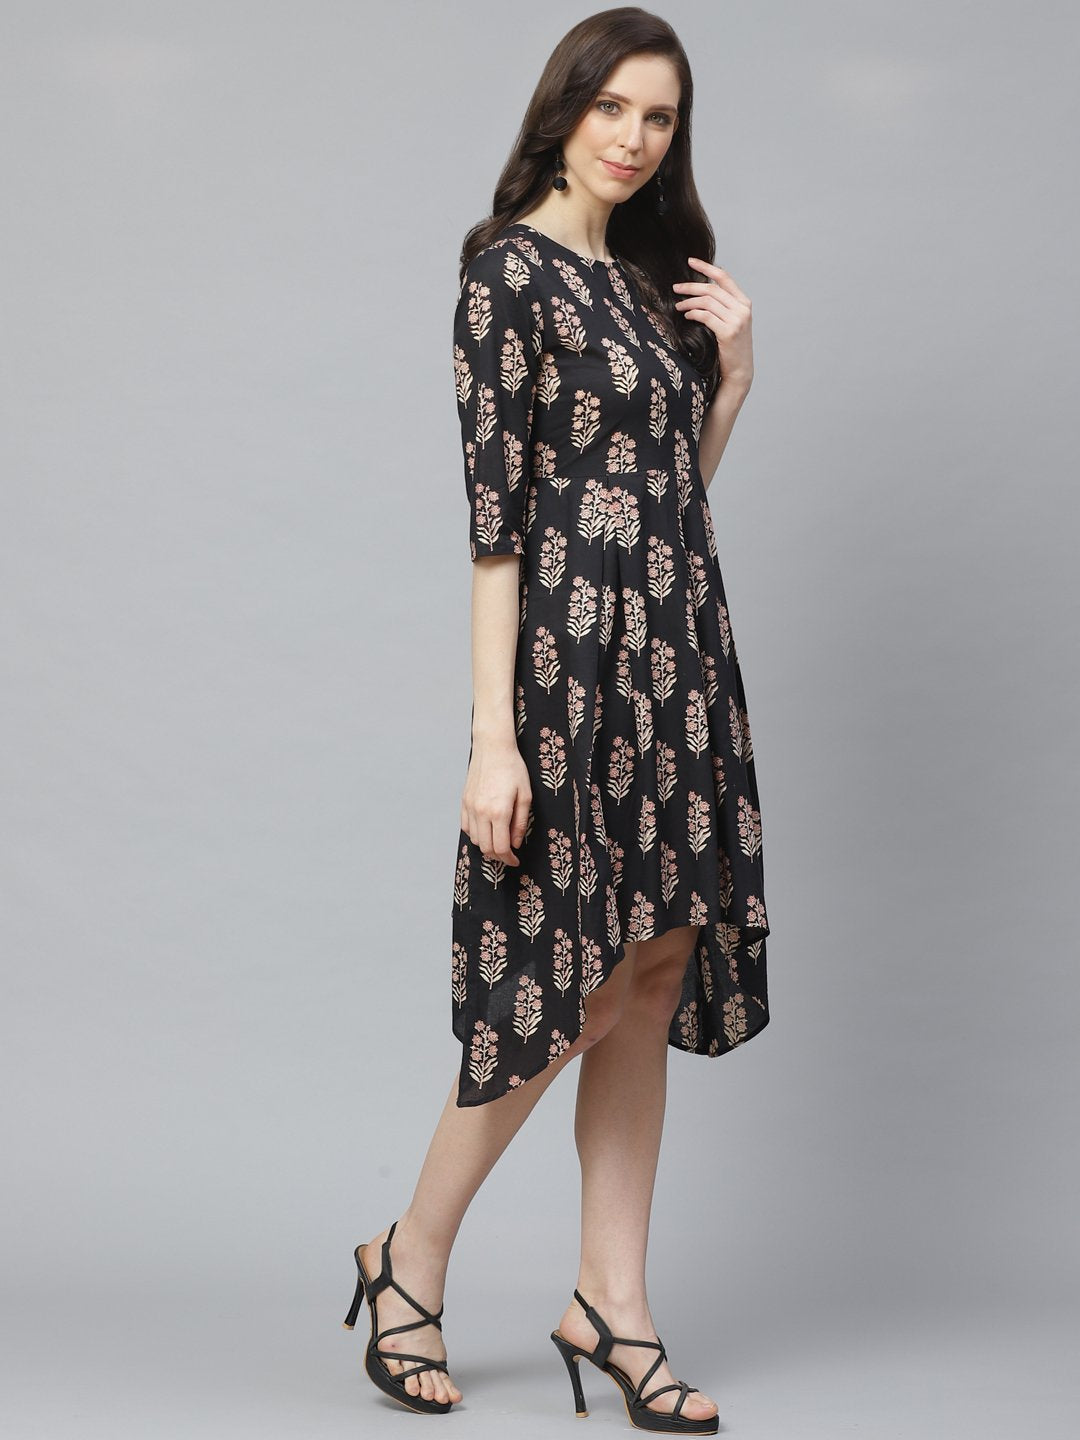 Women's Black Floral Printed Round Neck Cotton Fit And Flare Dress - Nayo Clothing